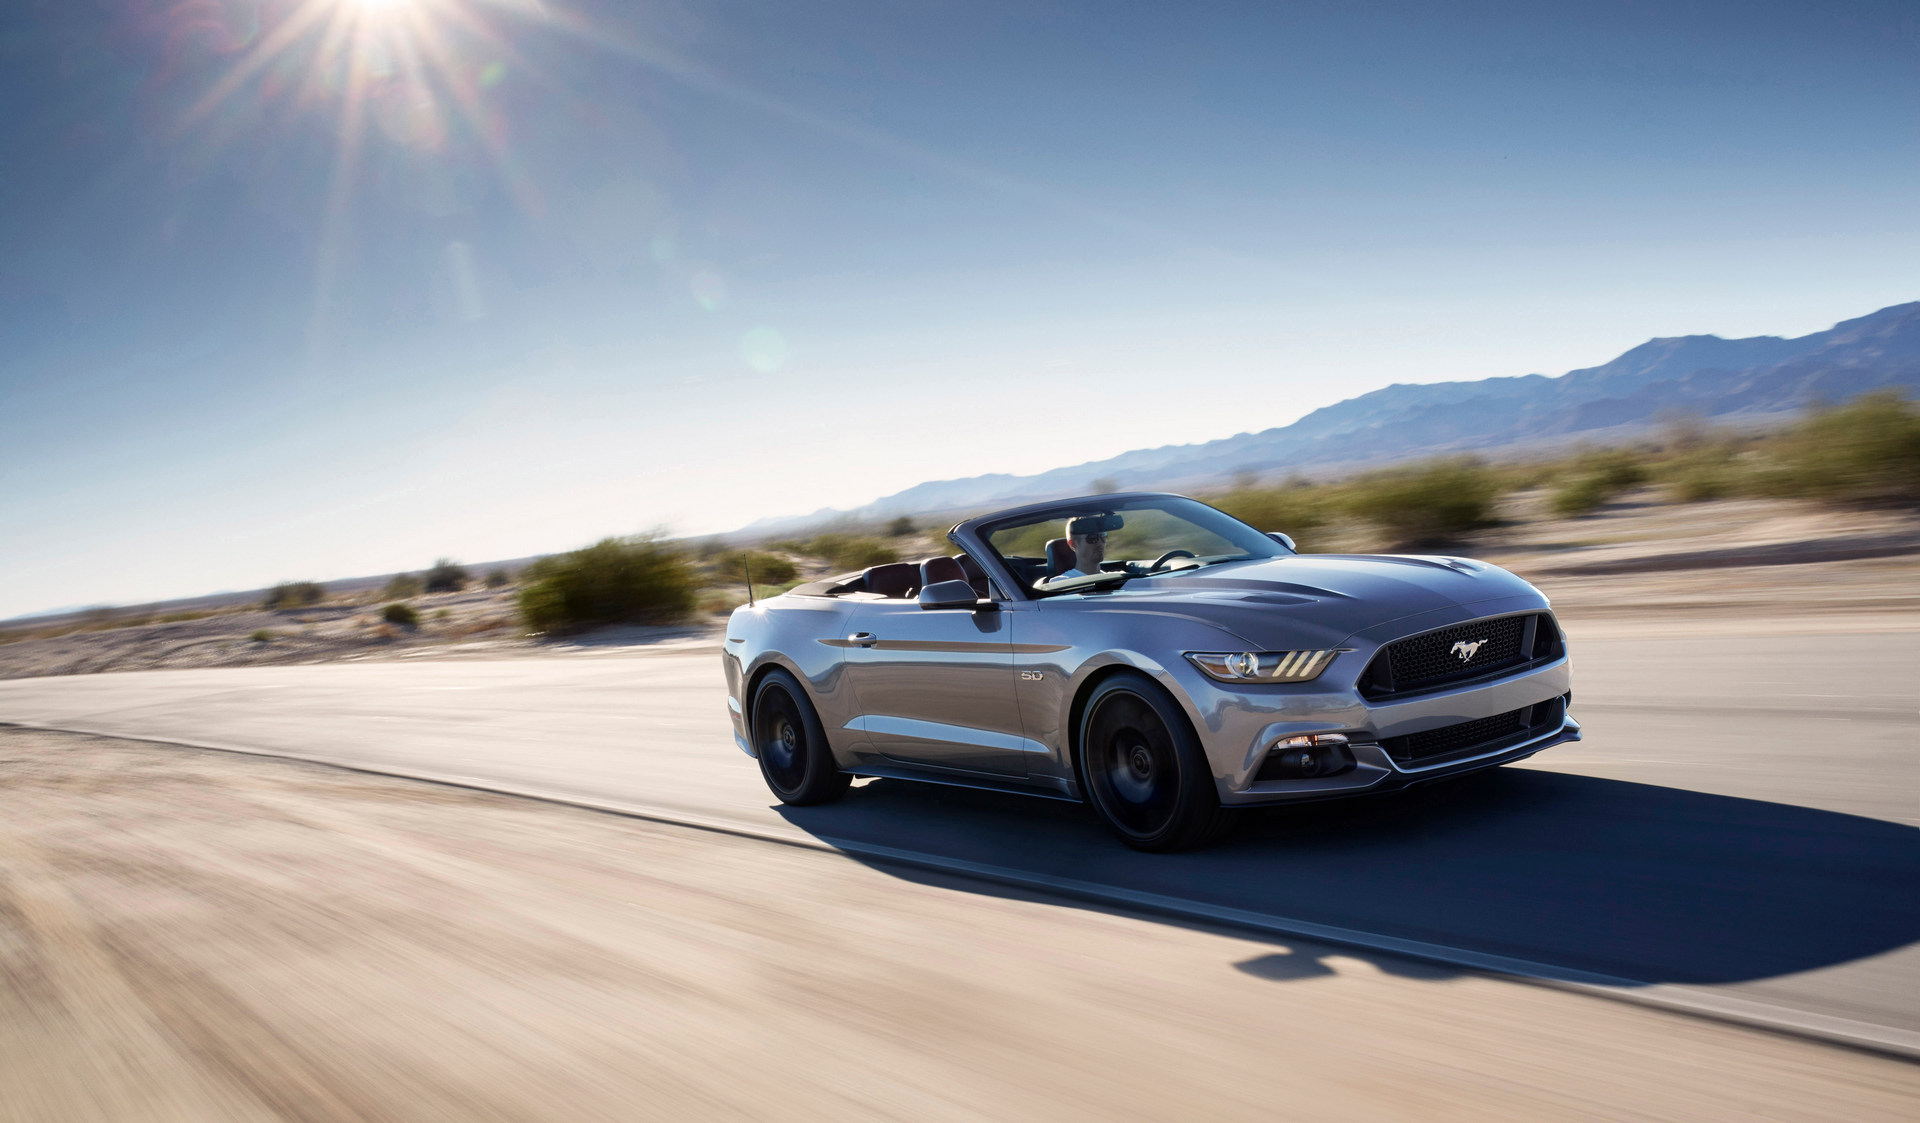 2016 Mustang GT Convertible © Ford Motor Company